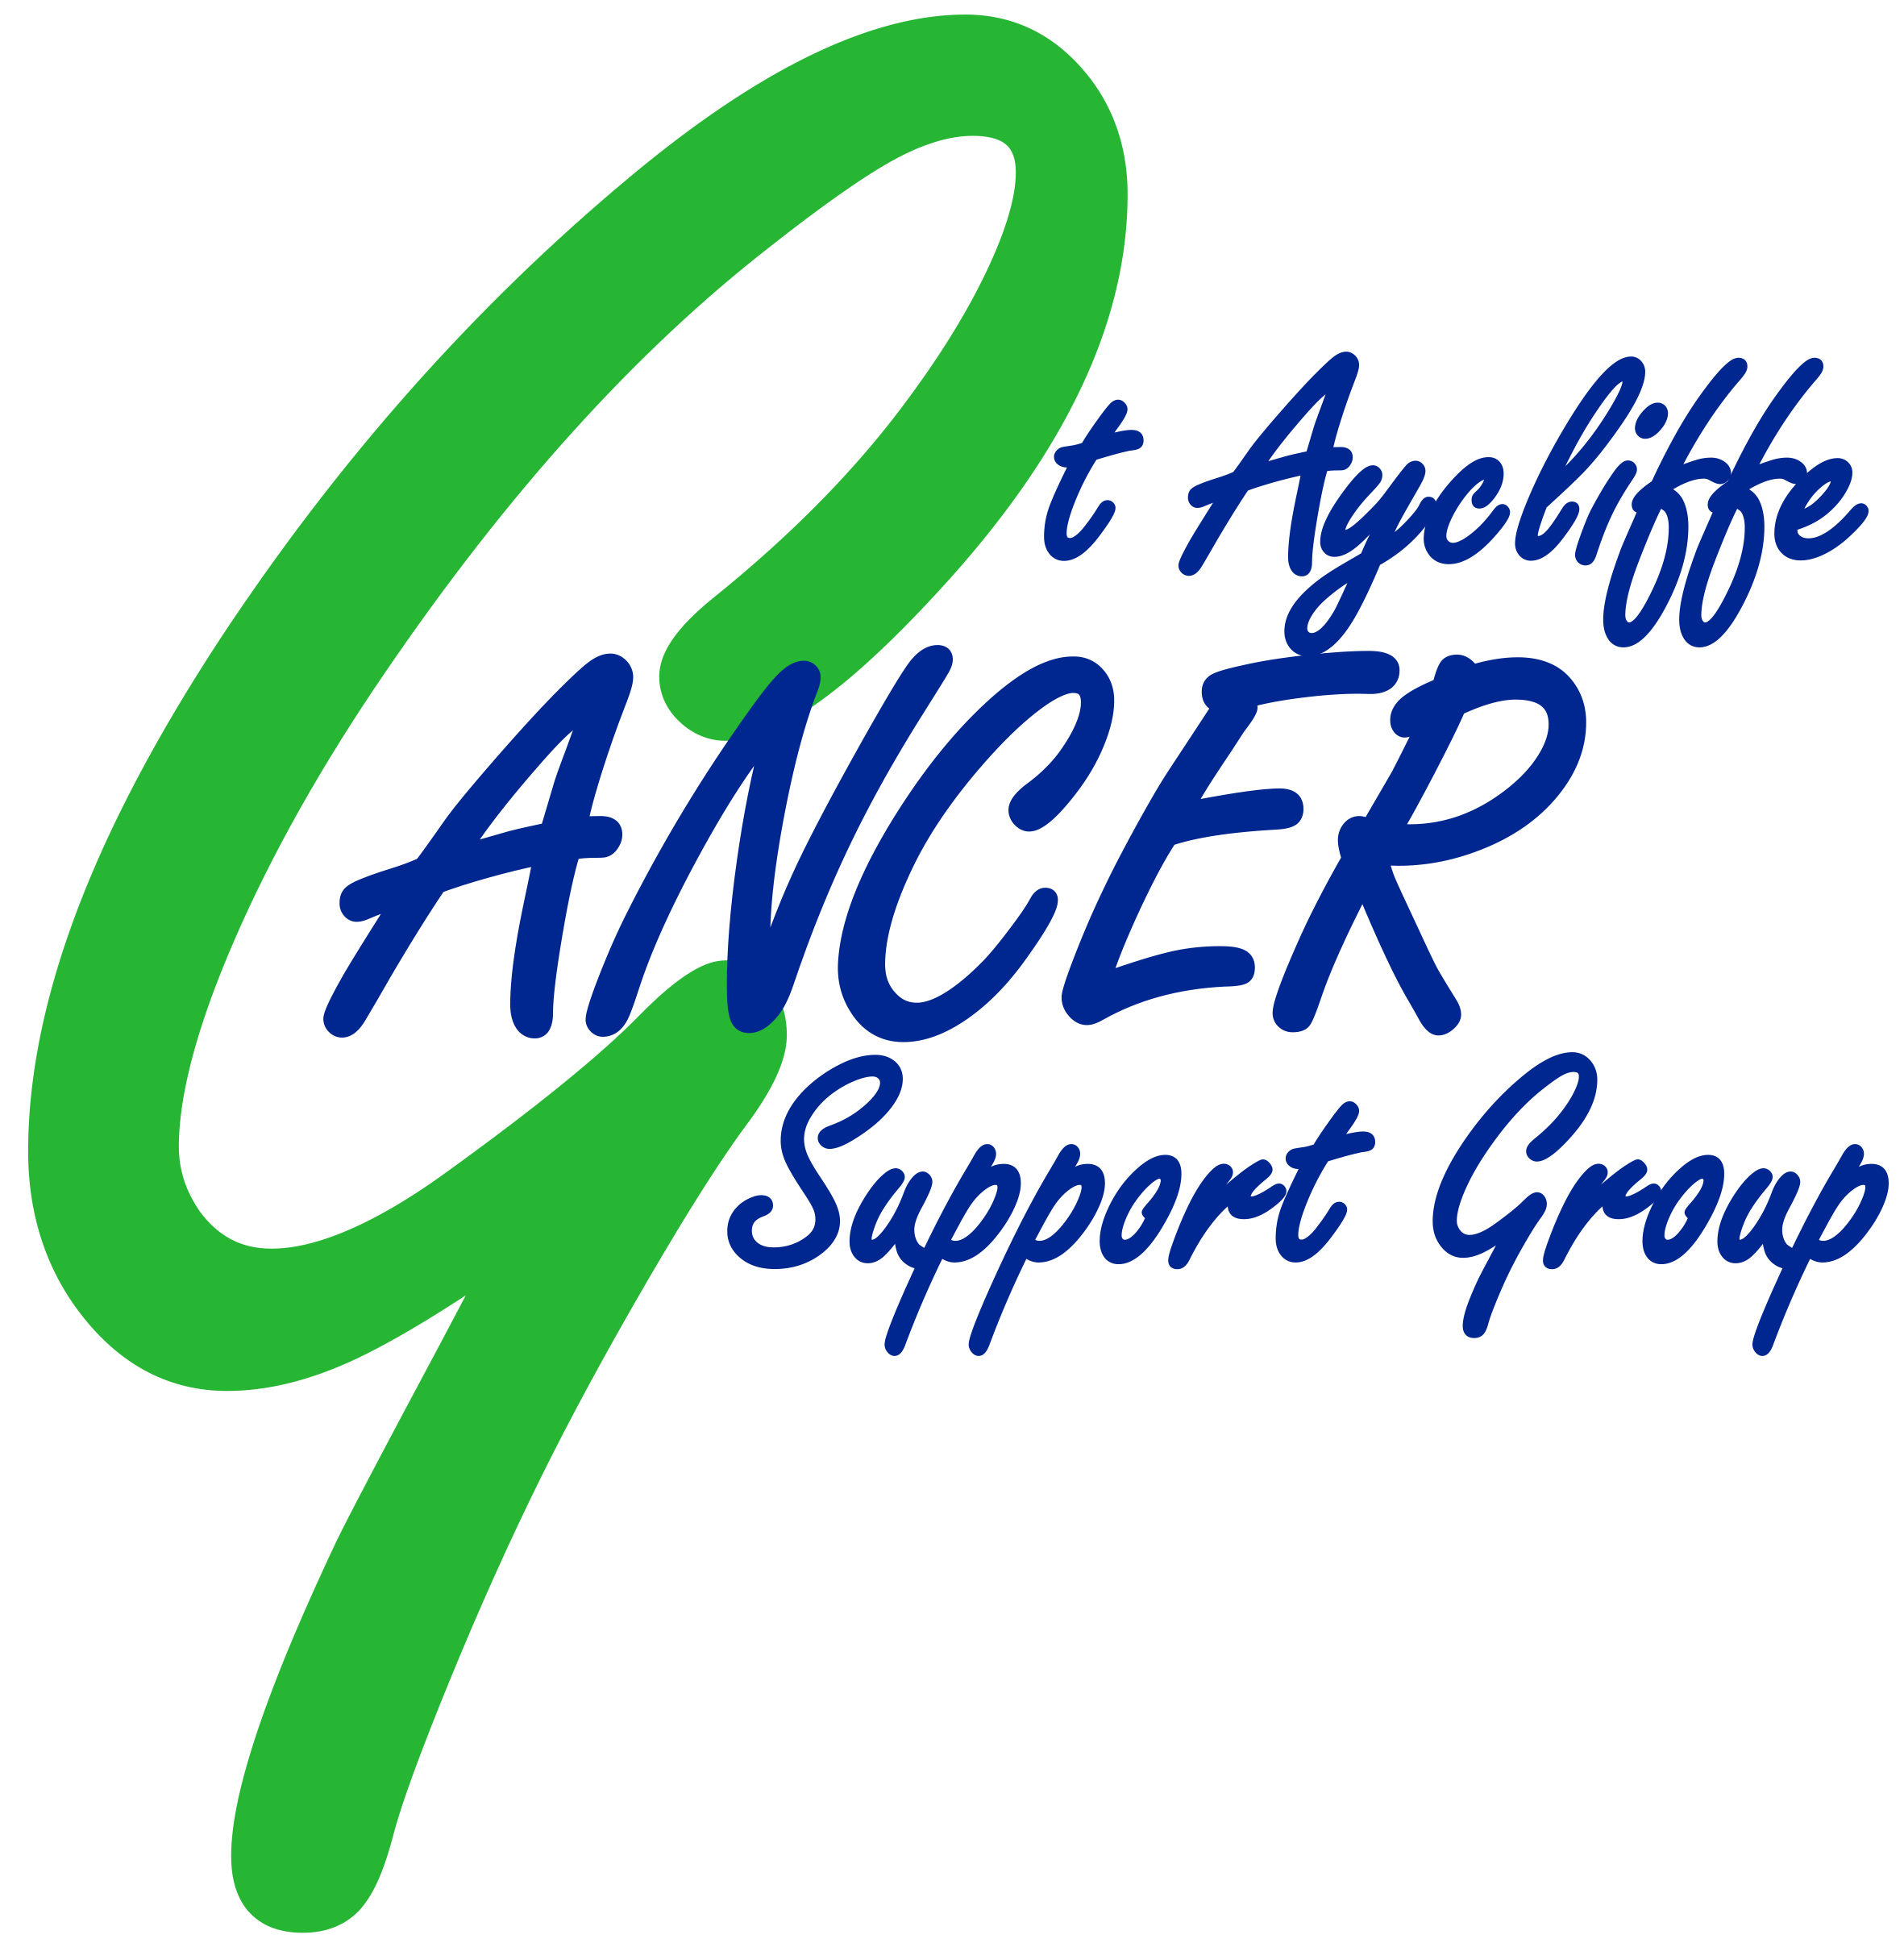 Cancer Support Group in Community Shop